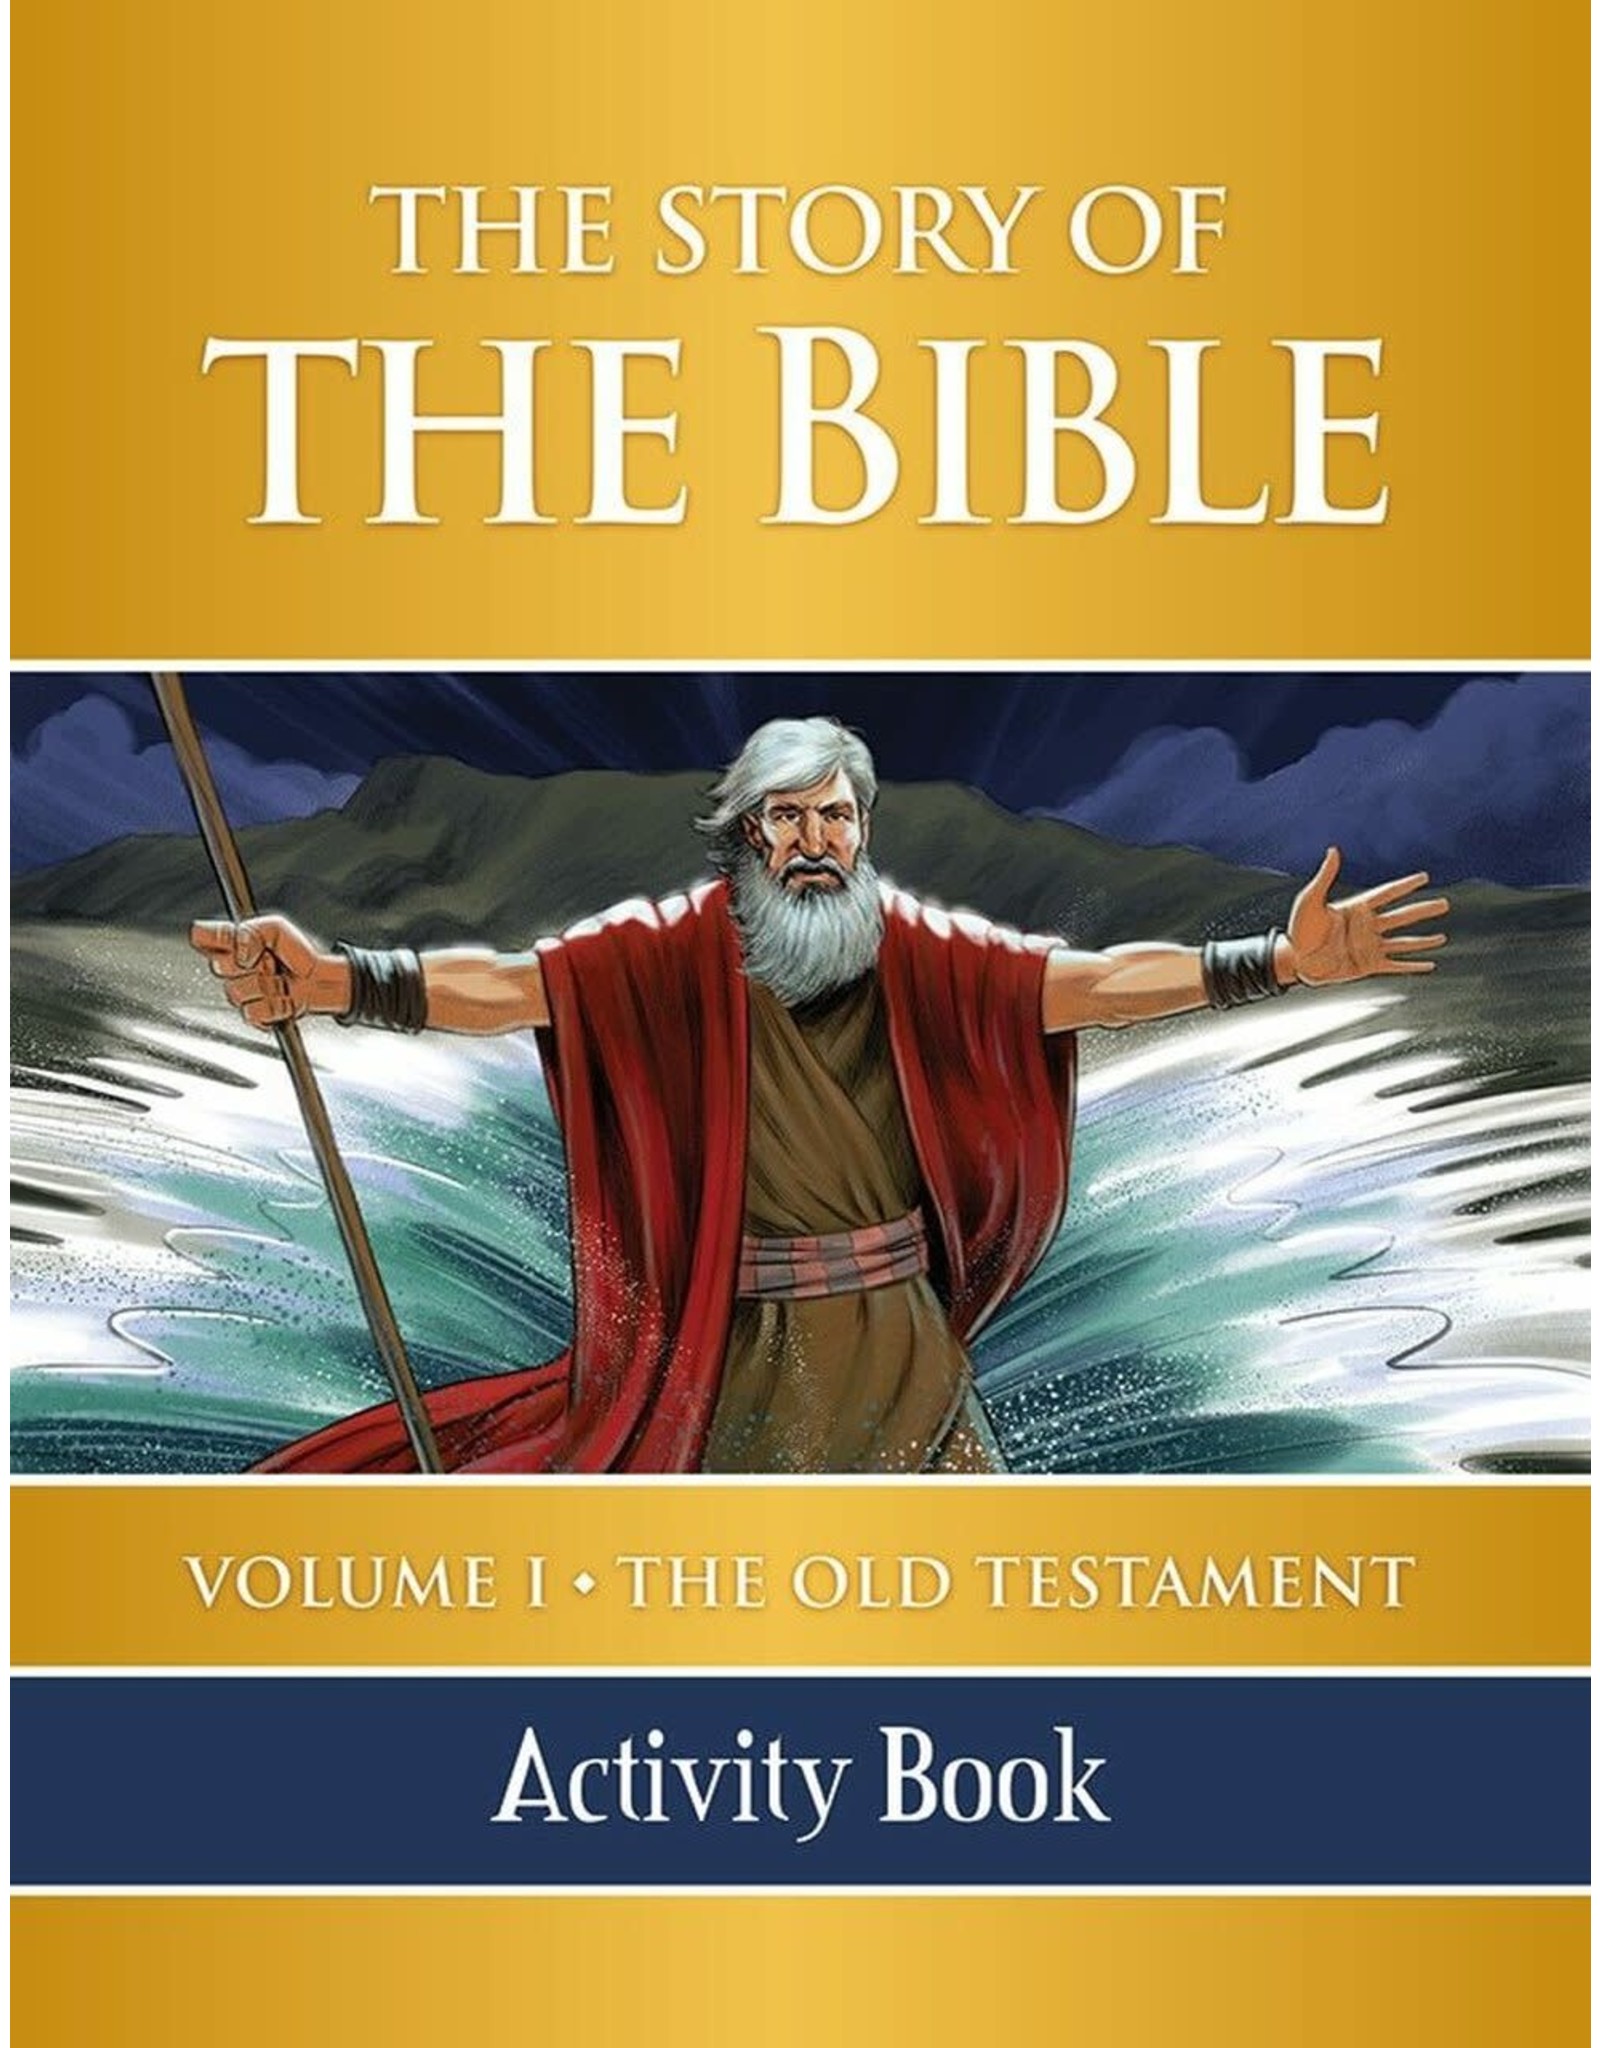 Tan Books The Story Of The Bible Volume 1: The Old Testament (Activity Book) (Paperback)